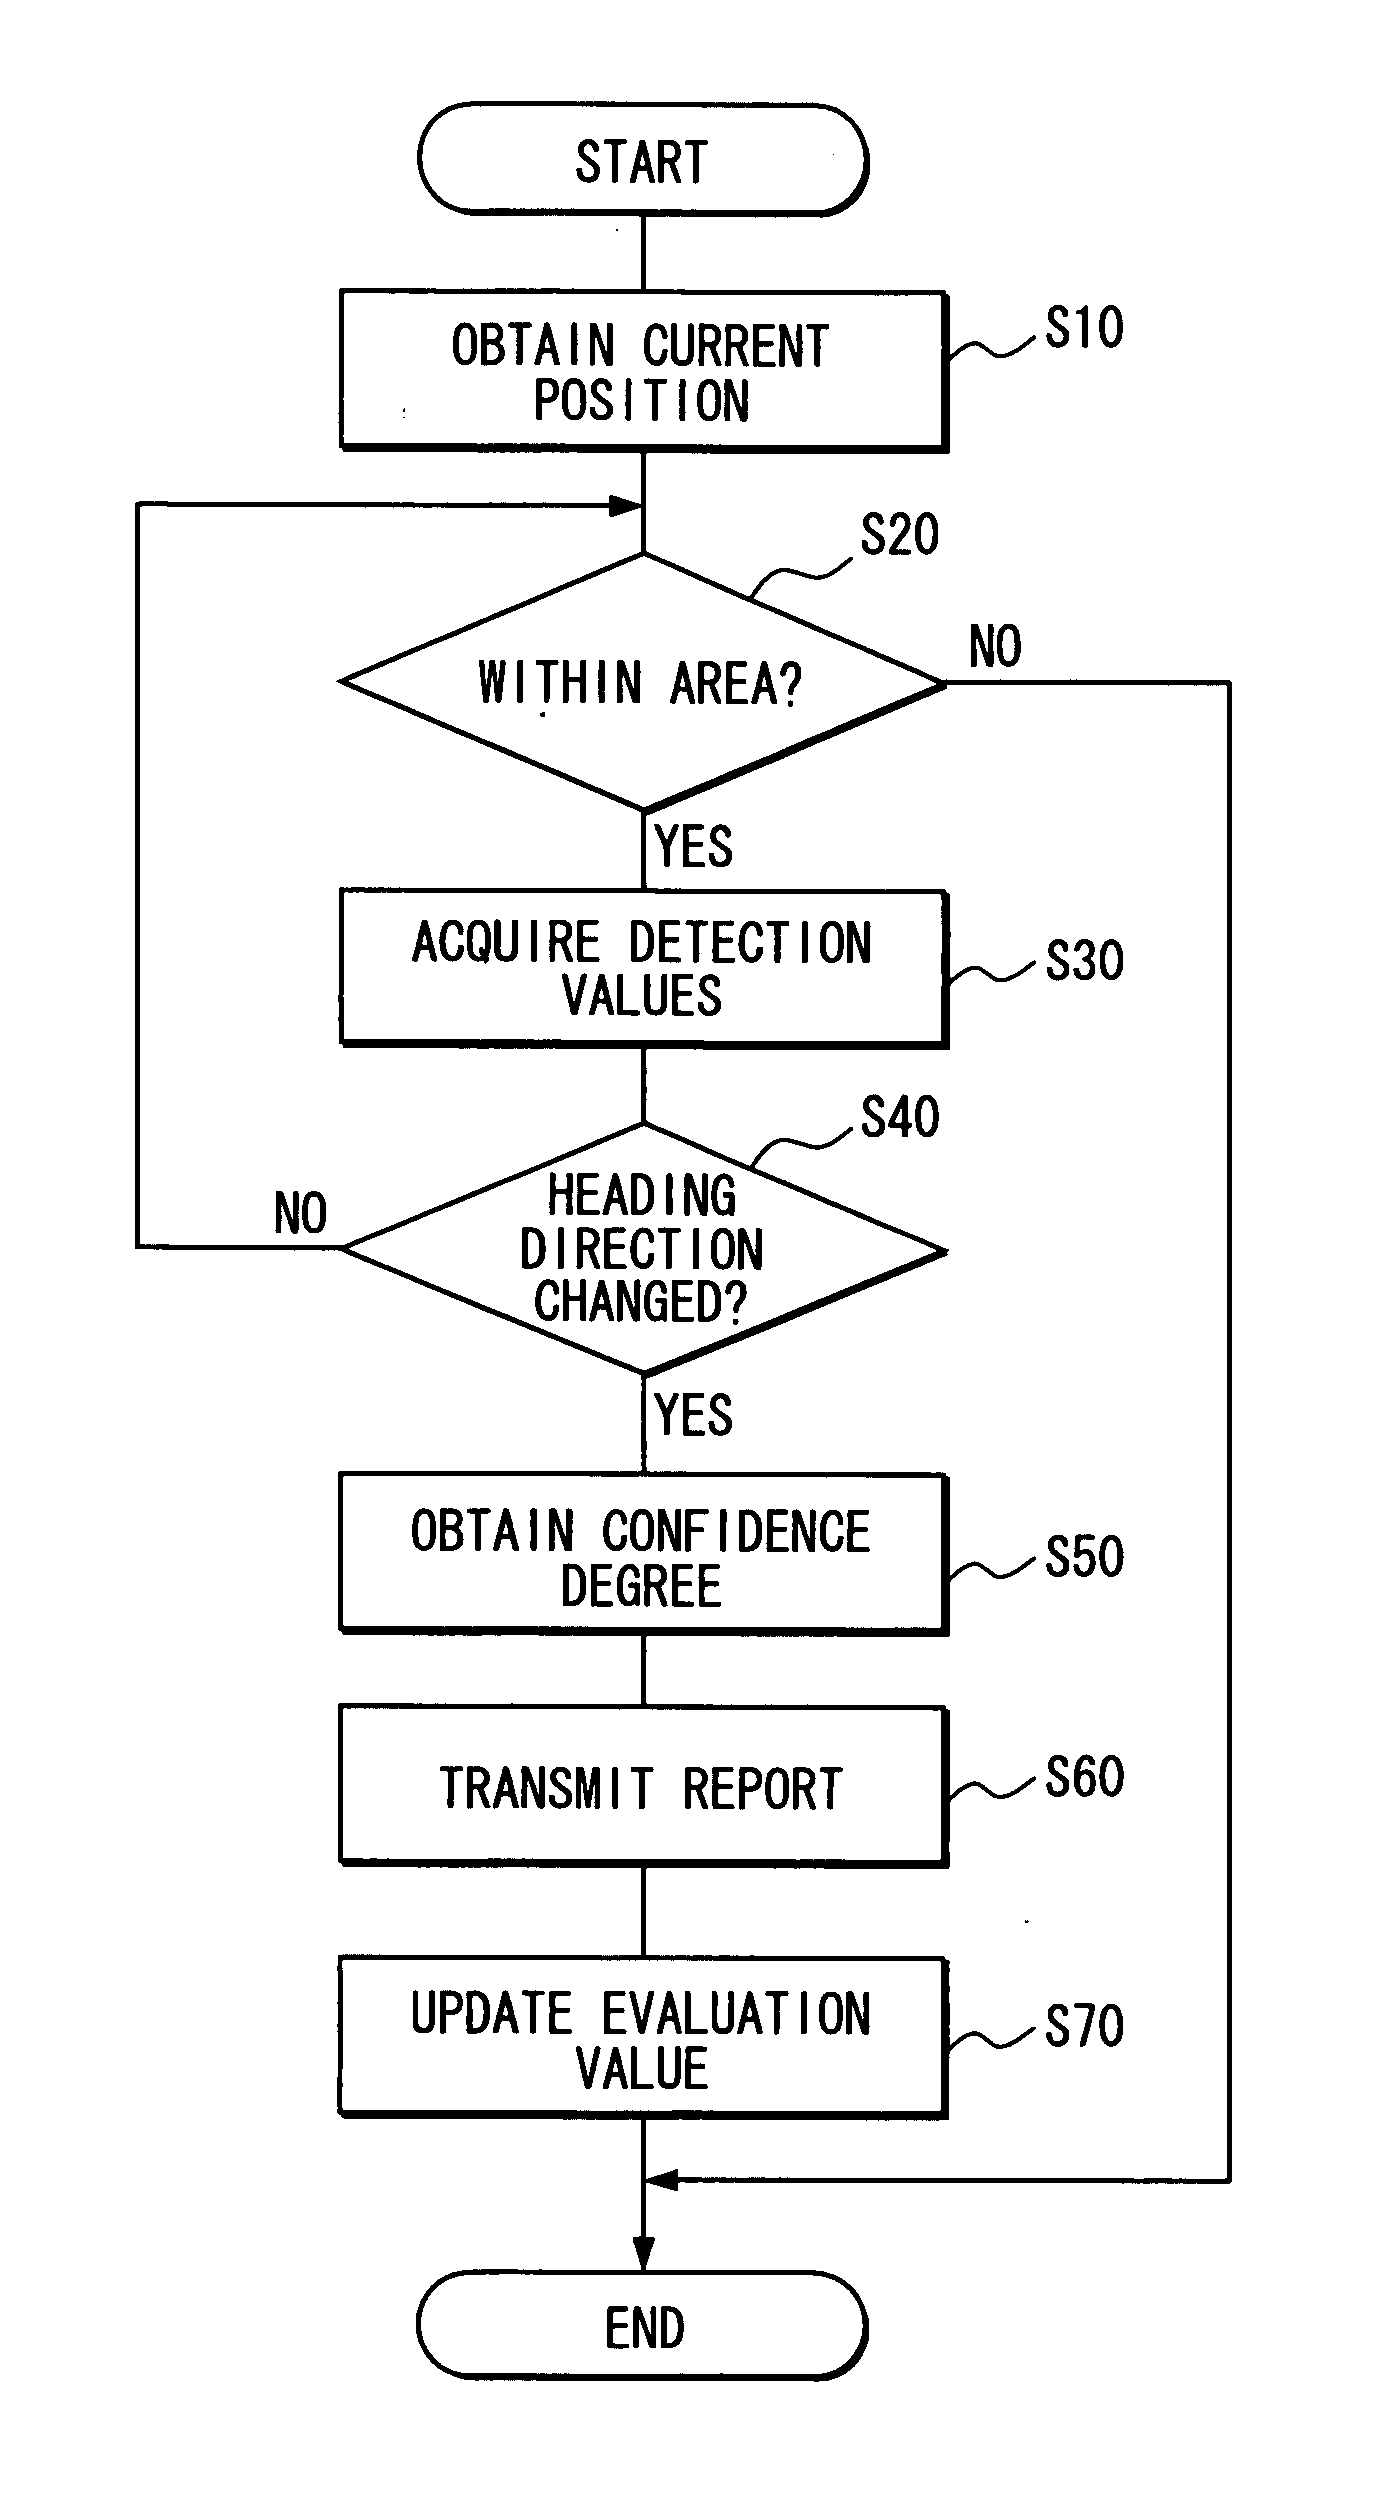 Positional information use apparatus